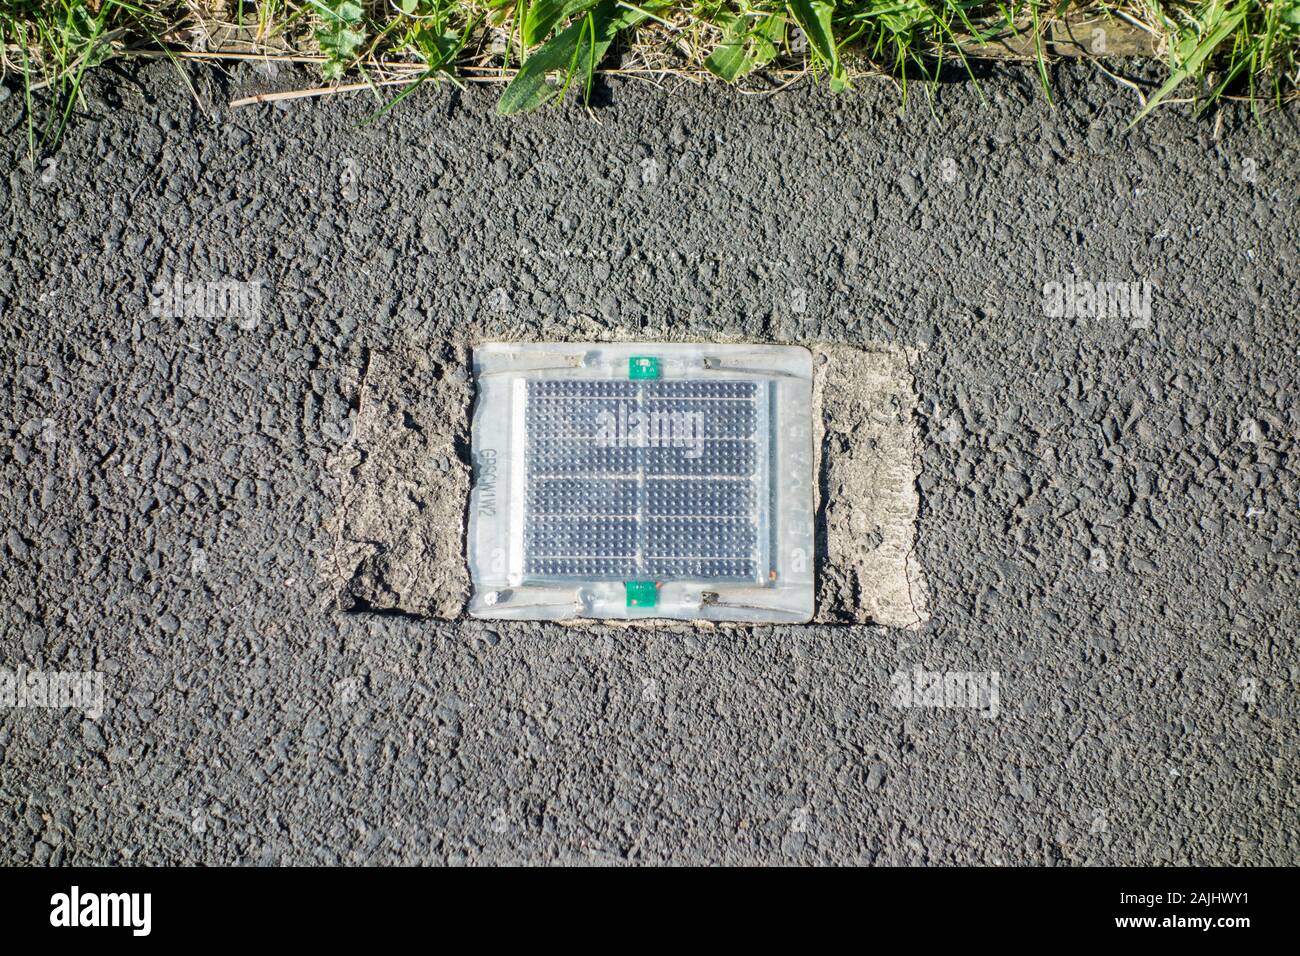 Small solar powered light set in a tarmac footpath in the UK Stock Photo